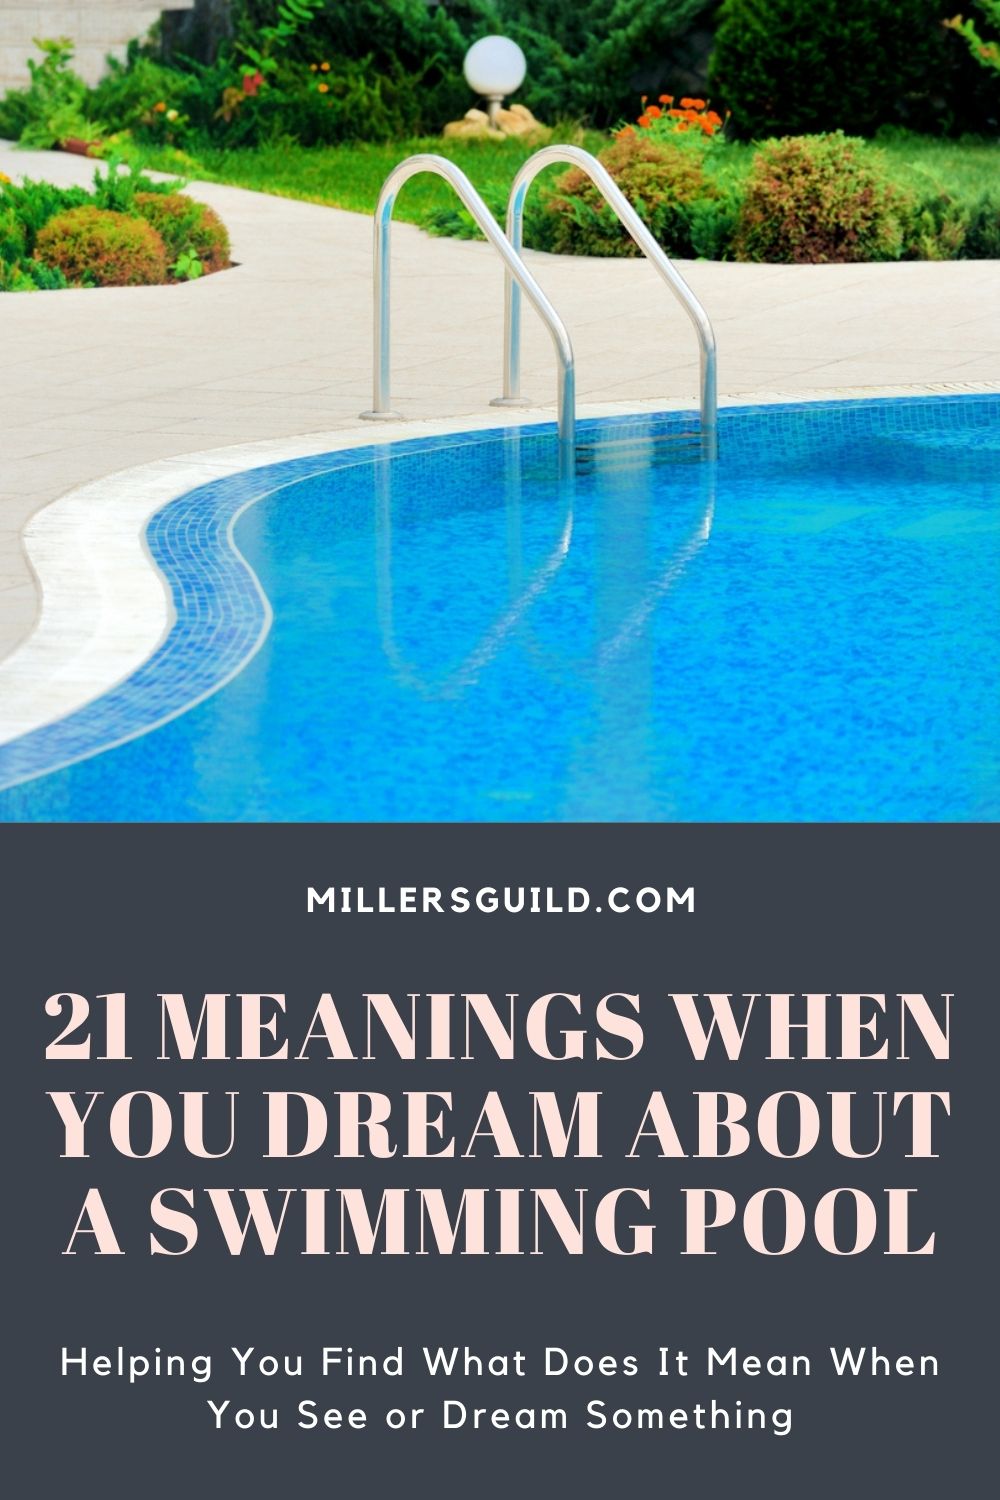 21 Meanings When You Dream About a Swimming Pool 2